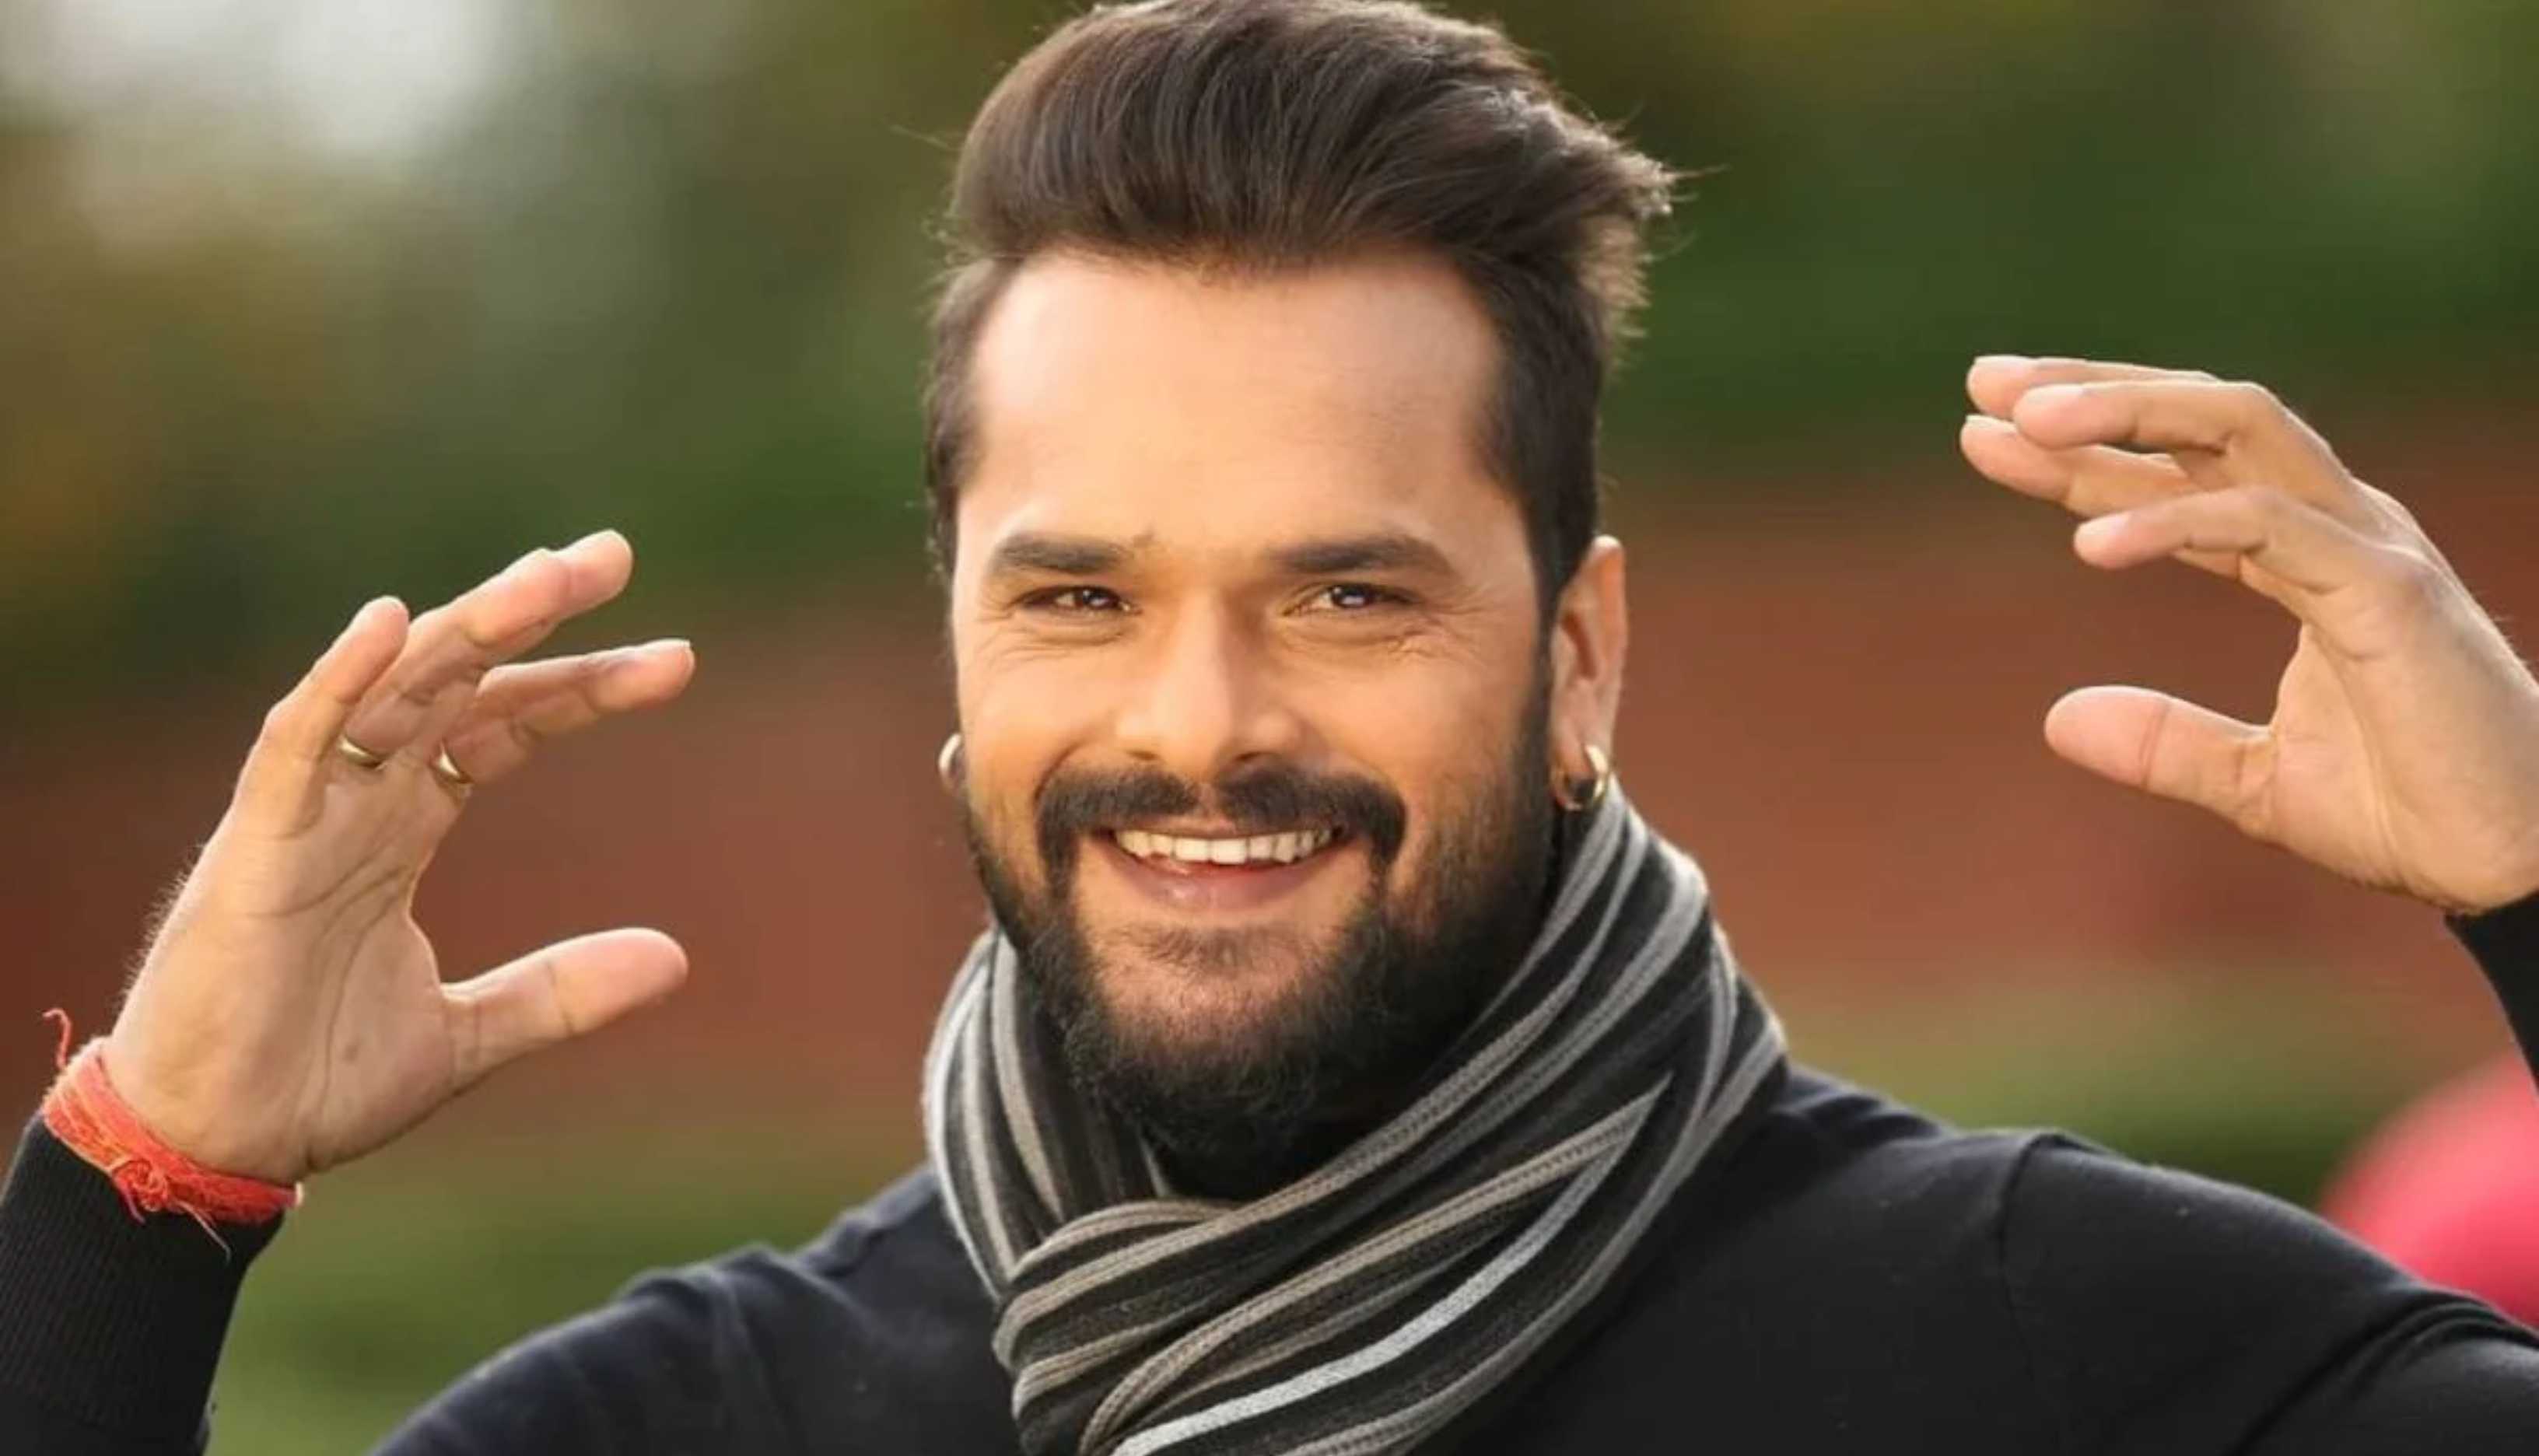 From Nagin to Sajan Chale Sasural, blockbuster hits to watch if you are a true Khesari Lal Yadav fan